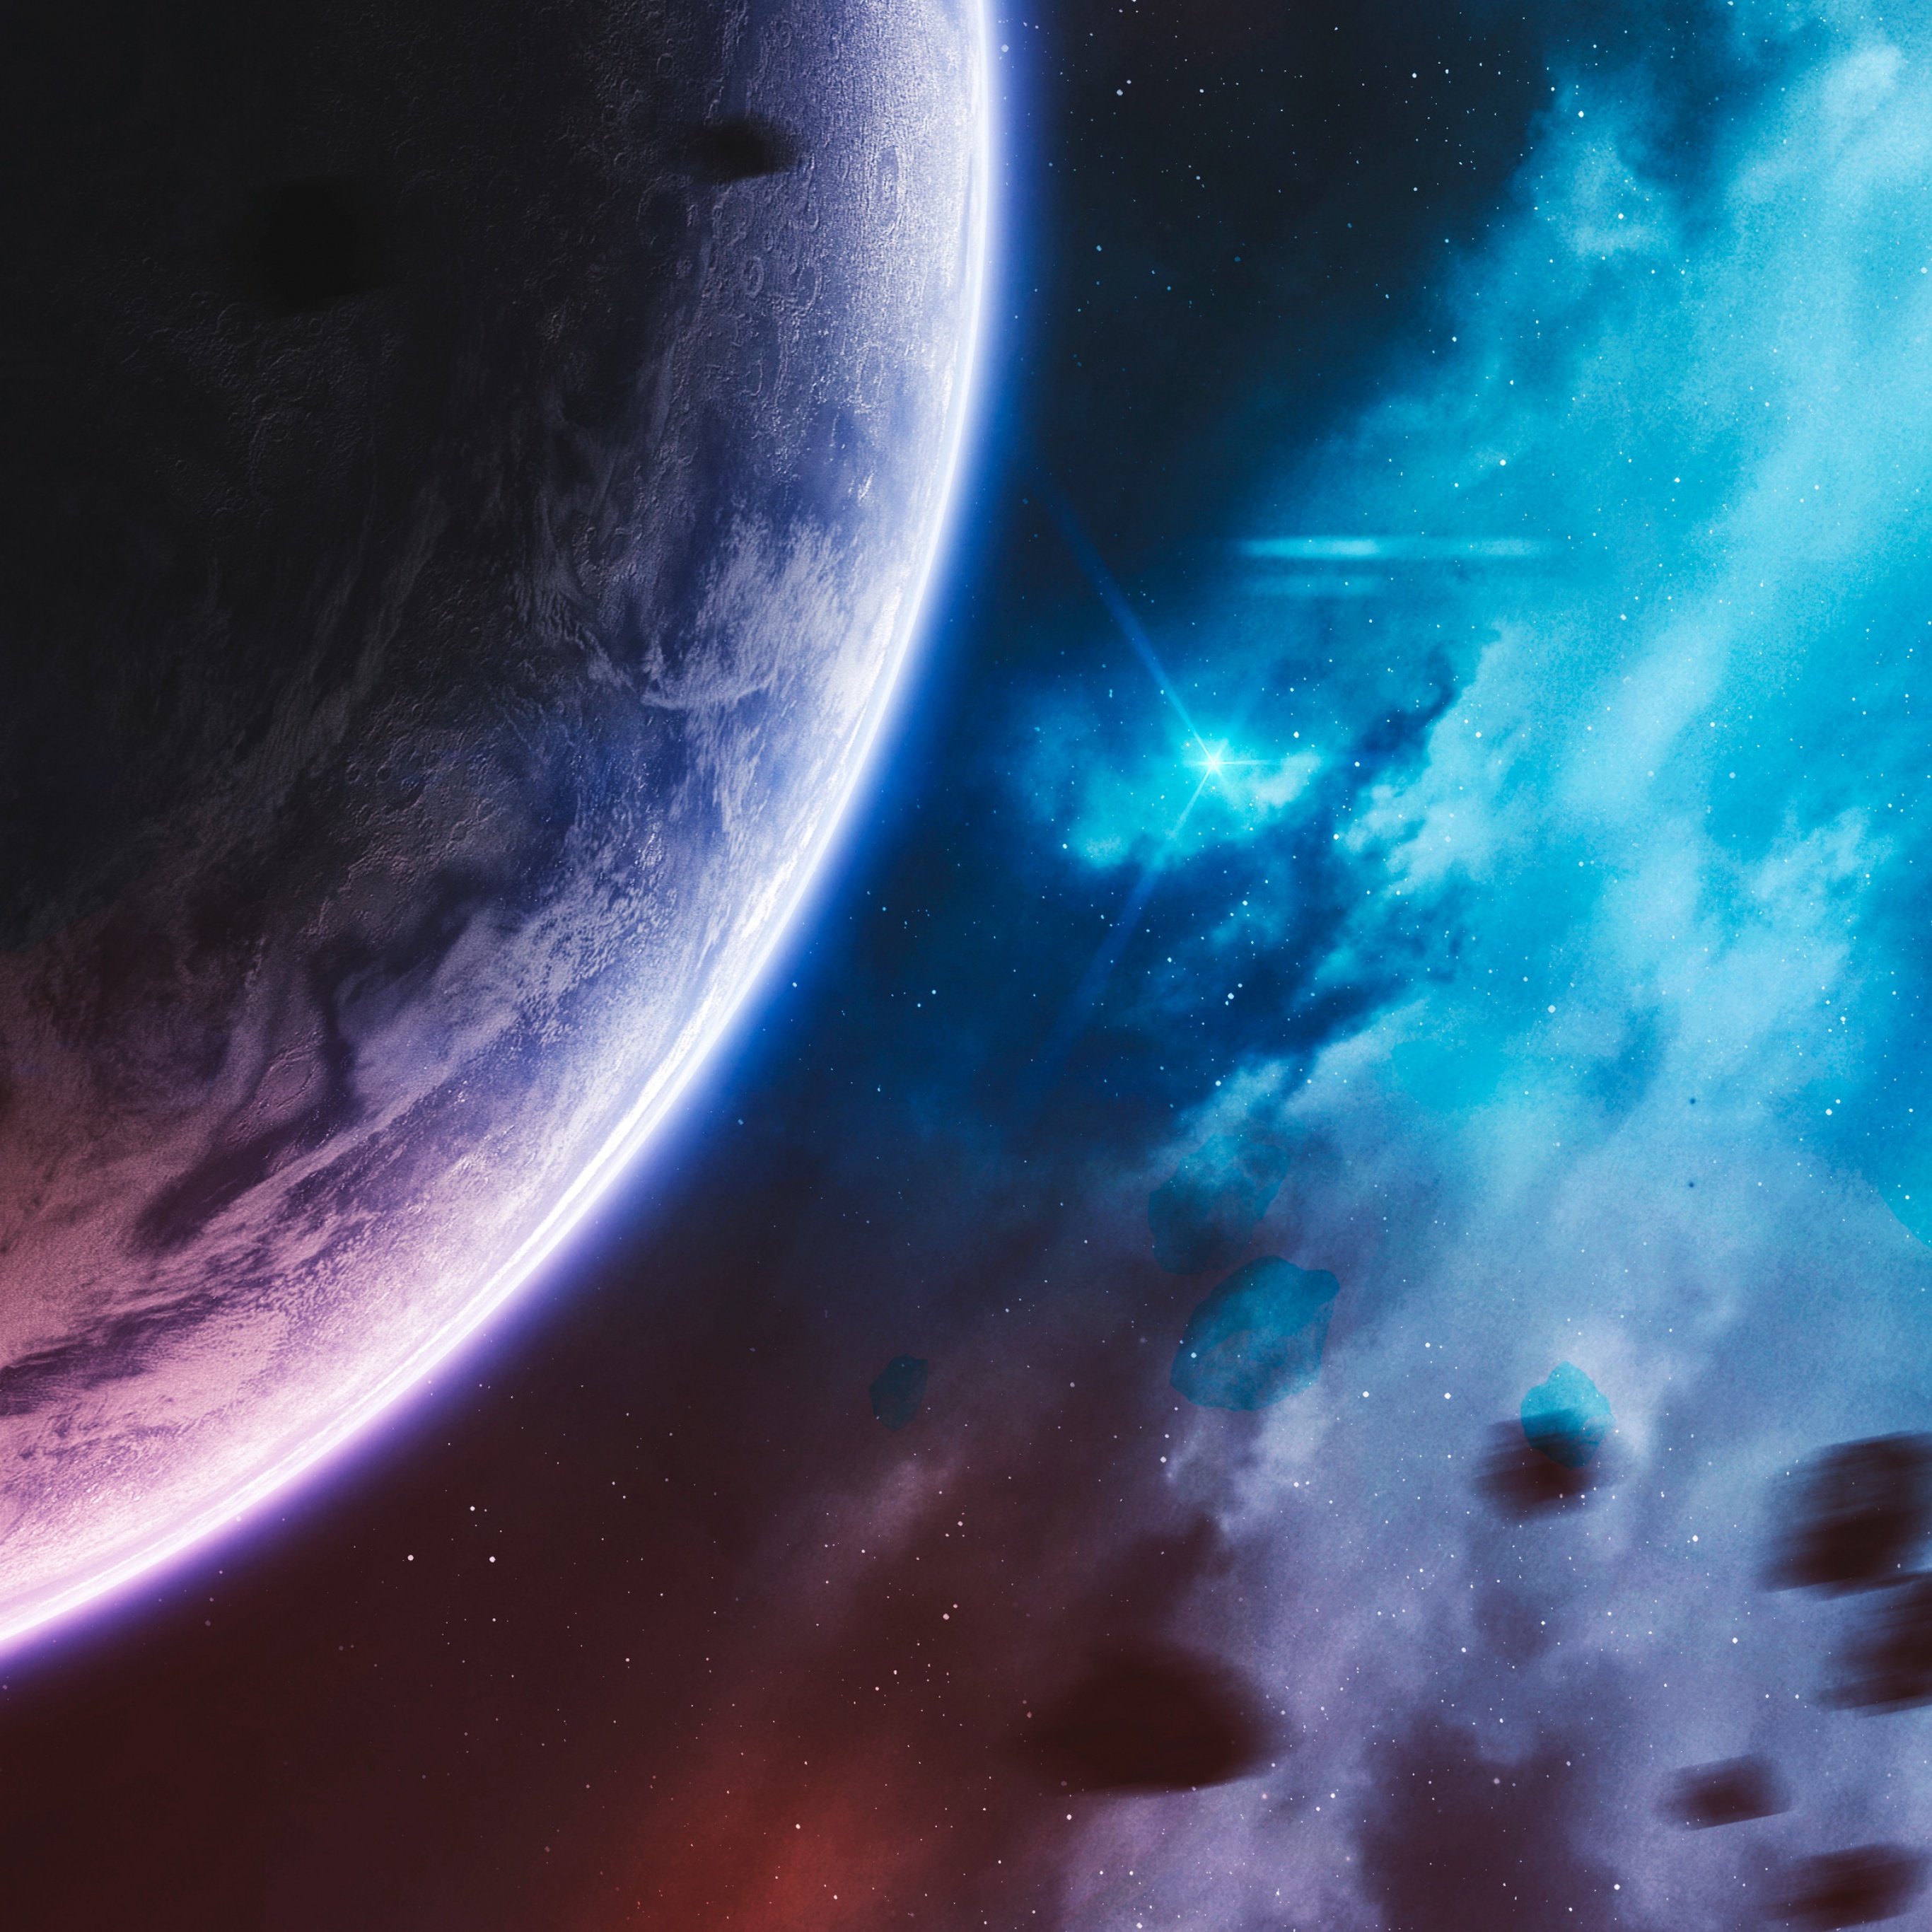 ArtStation 4K Beautiful Space Wallpapers, Landscapes, Galaxy Artworks |  lupon.gov.ph